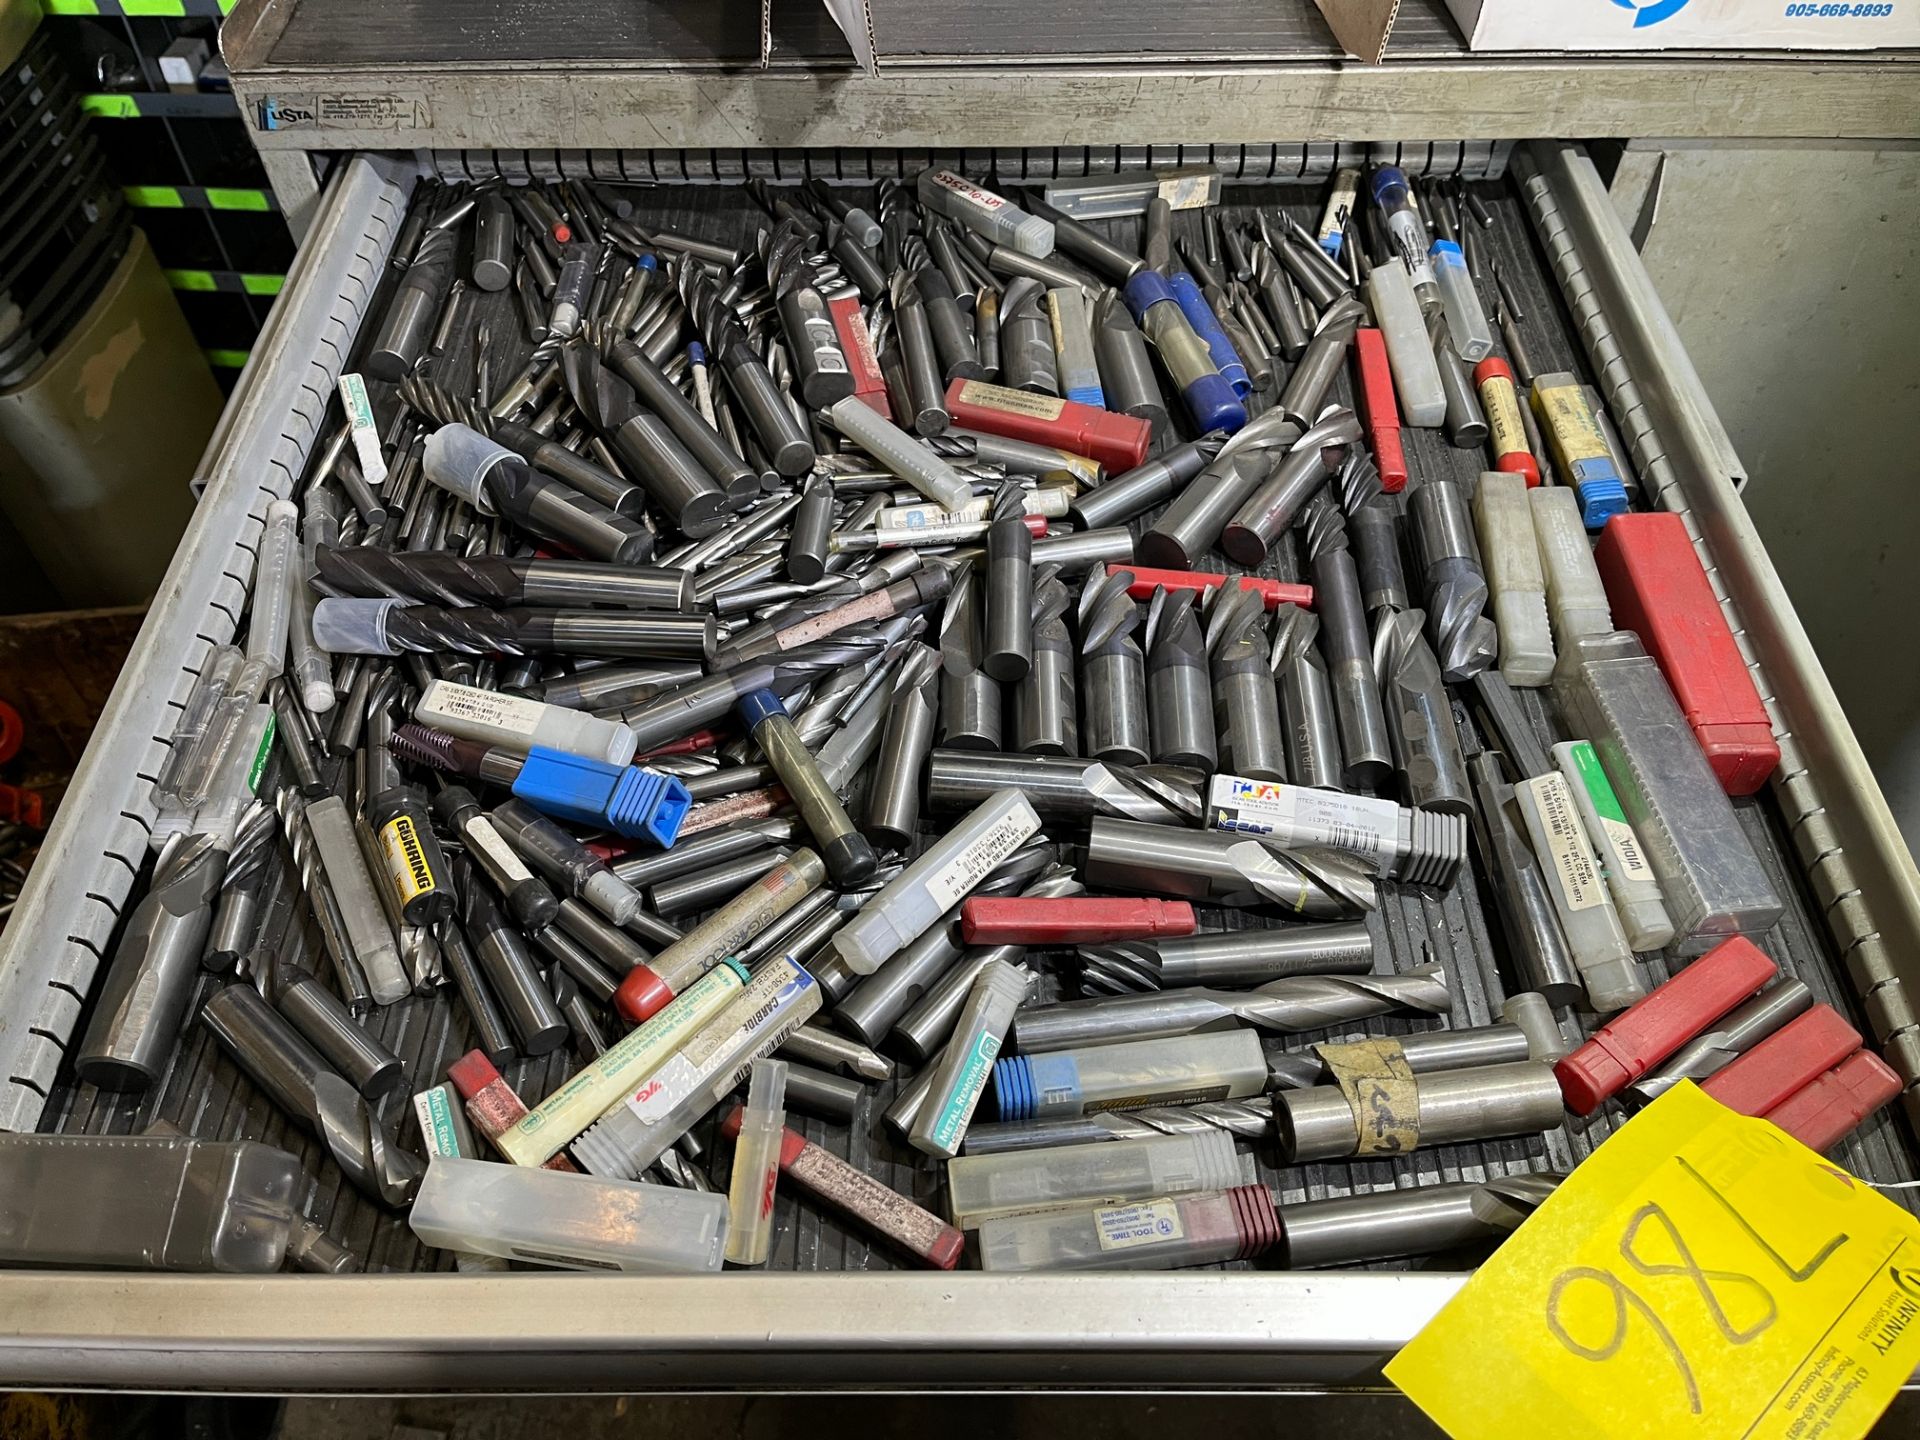 CONTENTS OF (1) DRAWER OF TOOL CABINET INCLUDING SOLID CARBIDE END MILLS